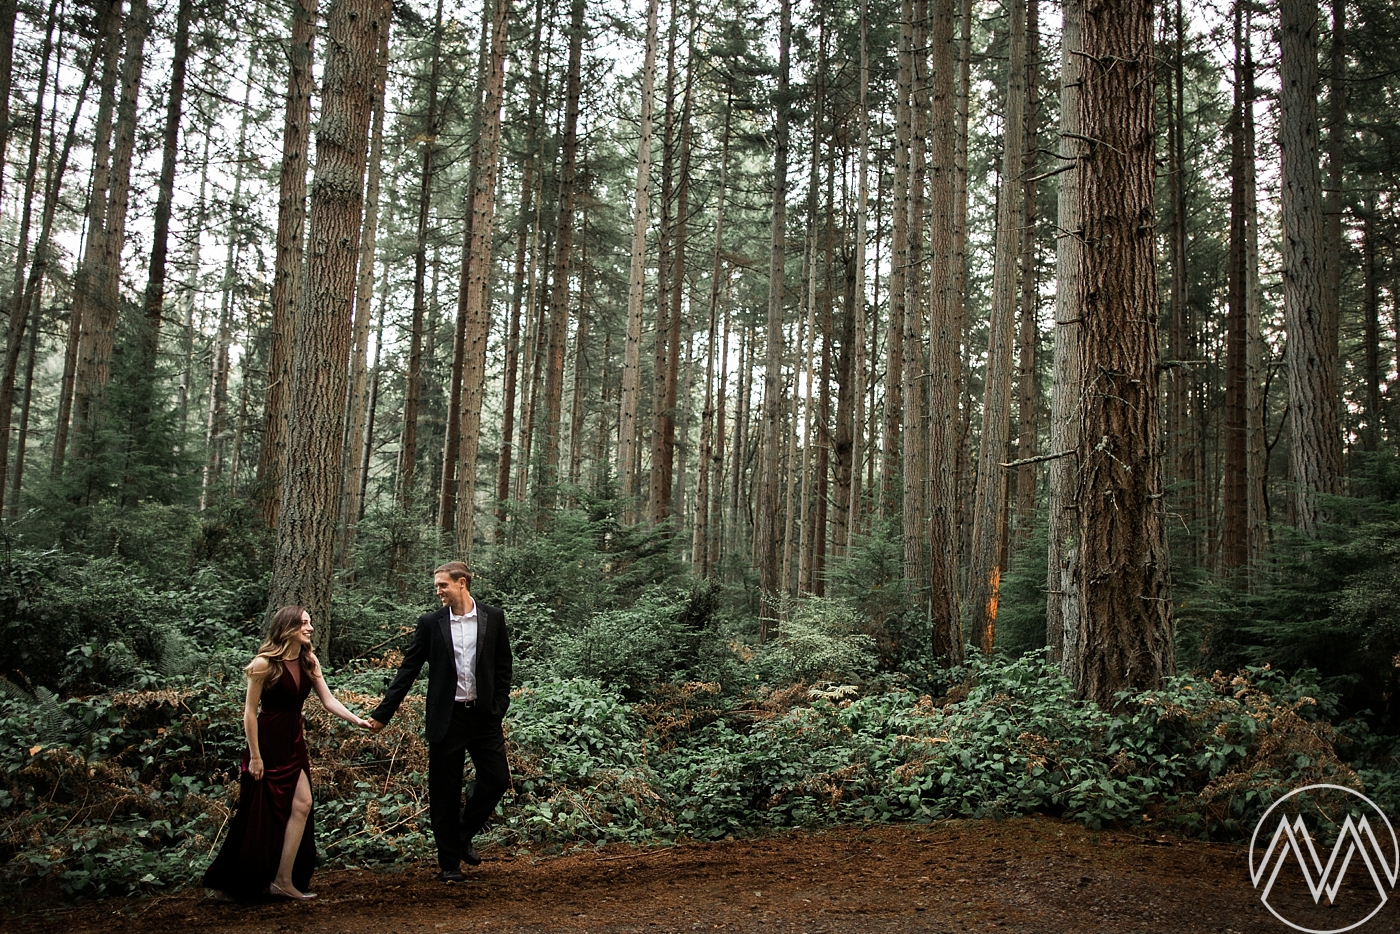 Tacoma Engagement Session - Five Mile Drive at Point Defiance Park. Photographed by Intimate Wedding Photographer, Megan Montalvo Photography. 